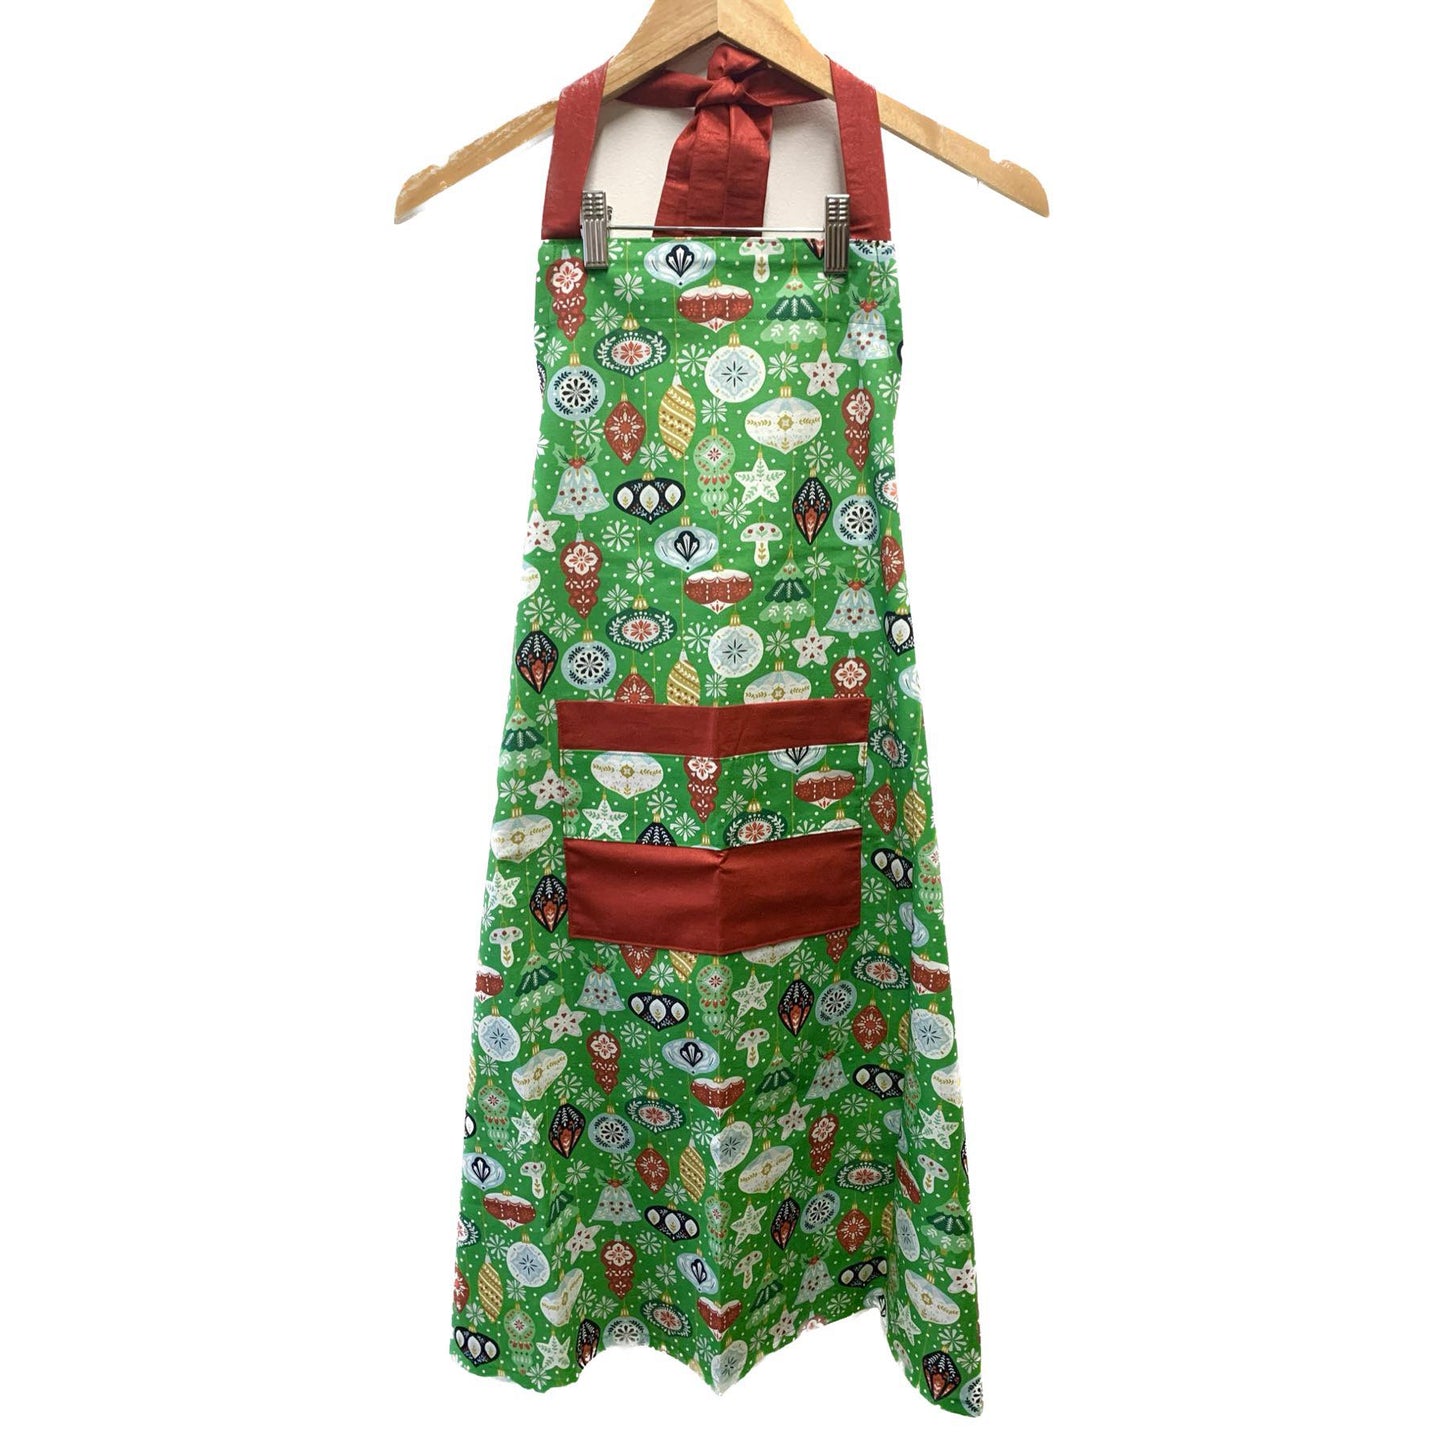 MAKIN' WHOOPEE - "Green Baubles" Christmas Apron